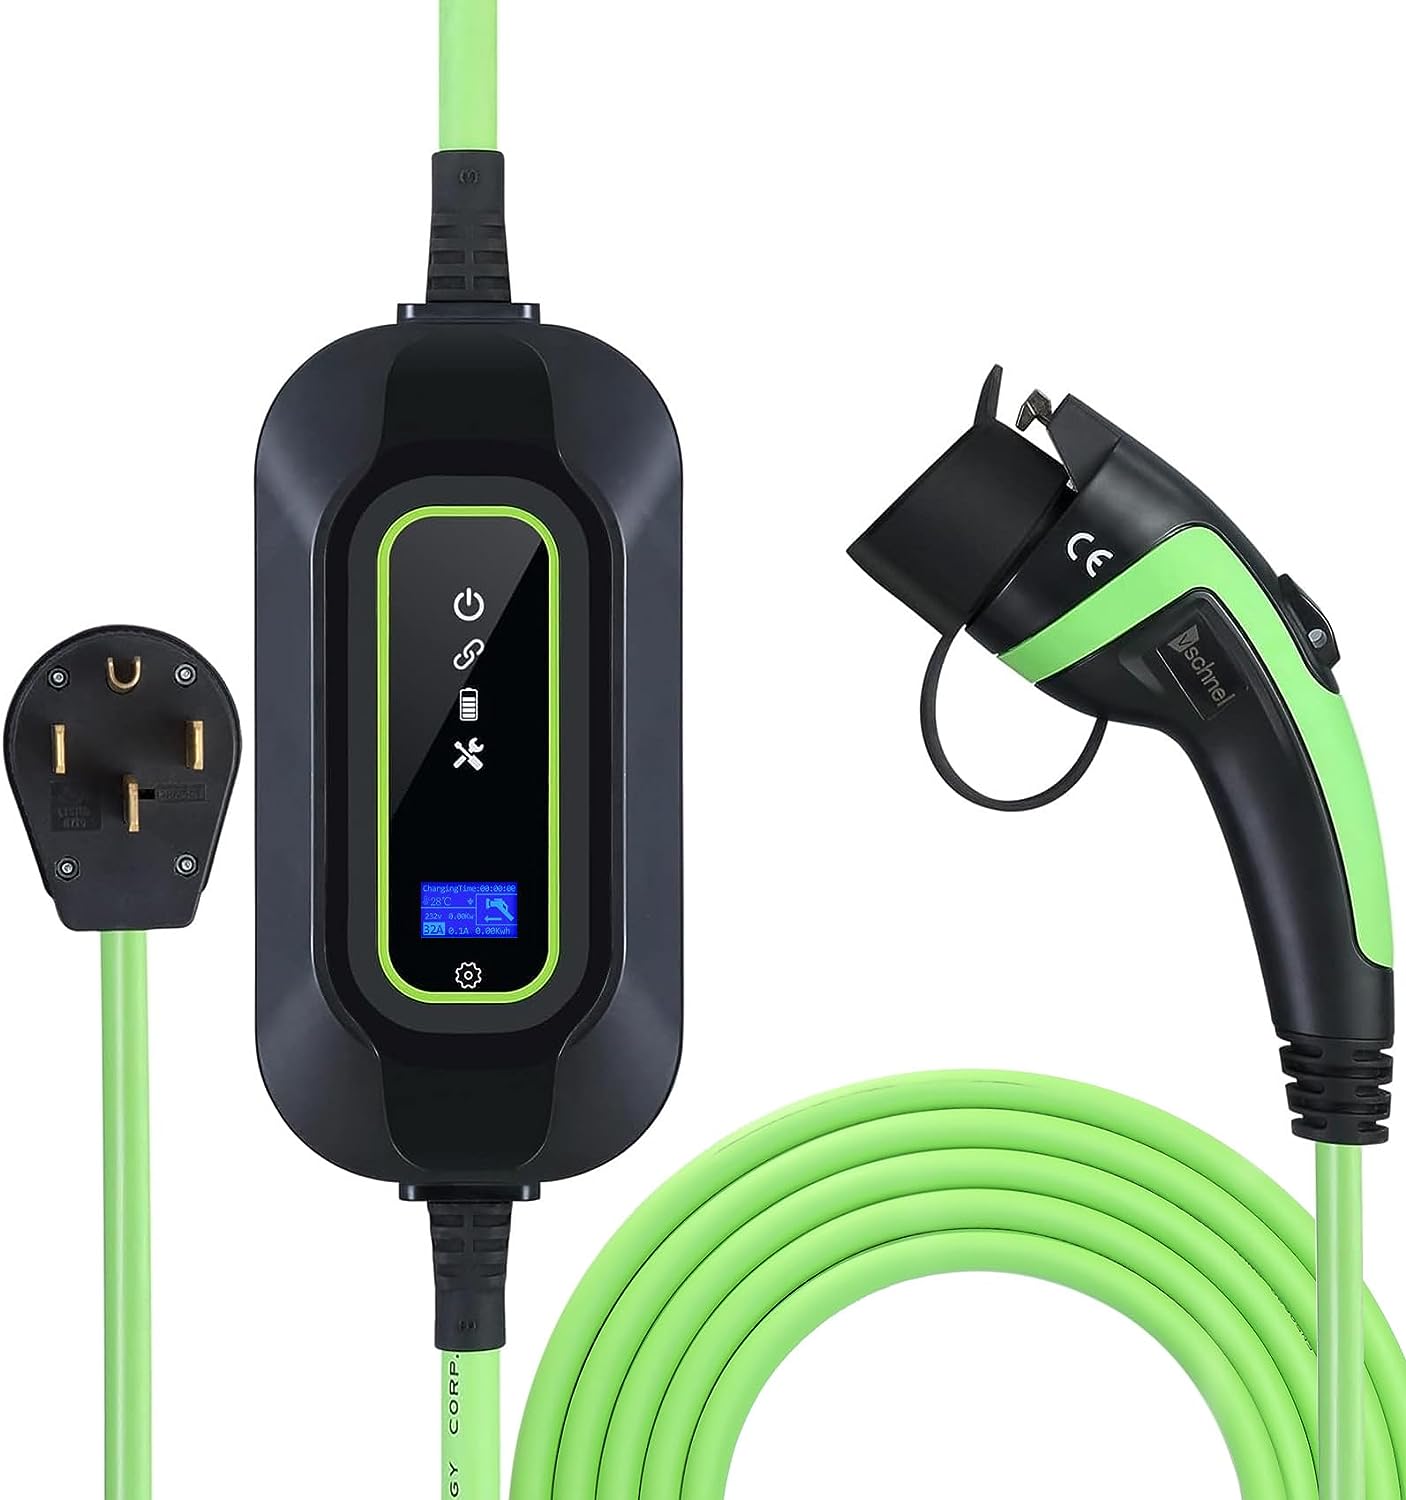 Vschnel Level 2 EV Charger 110-220V 8-32Amp Adjustable, 7.4kW Portable Electric Vehicle Charger Cable Indoor/Outdoor, NEMA 14-50 EVSE Personal EV Charger, Time Delay Function